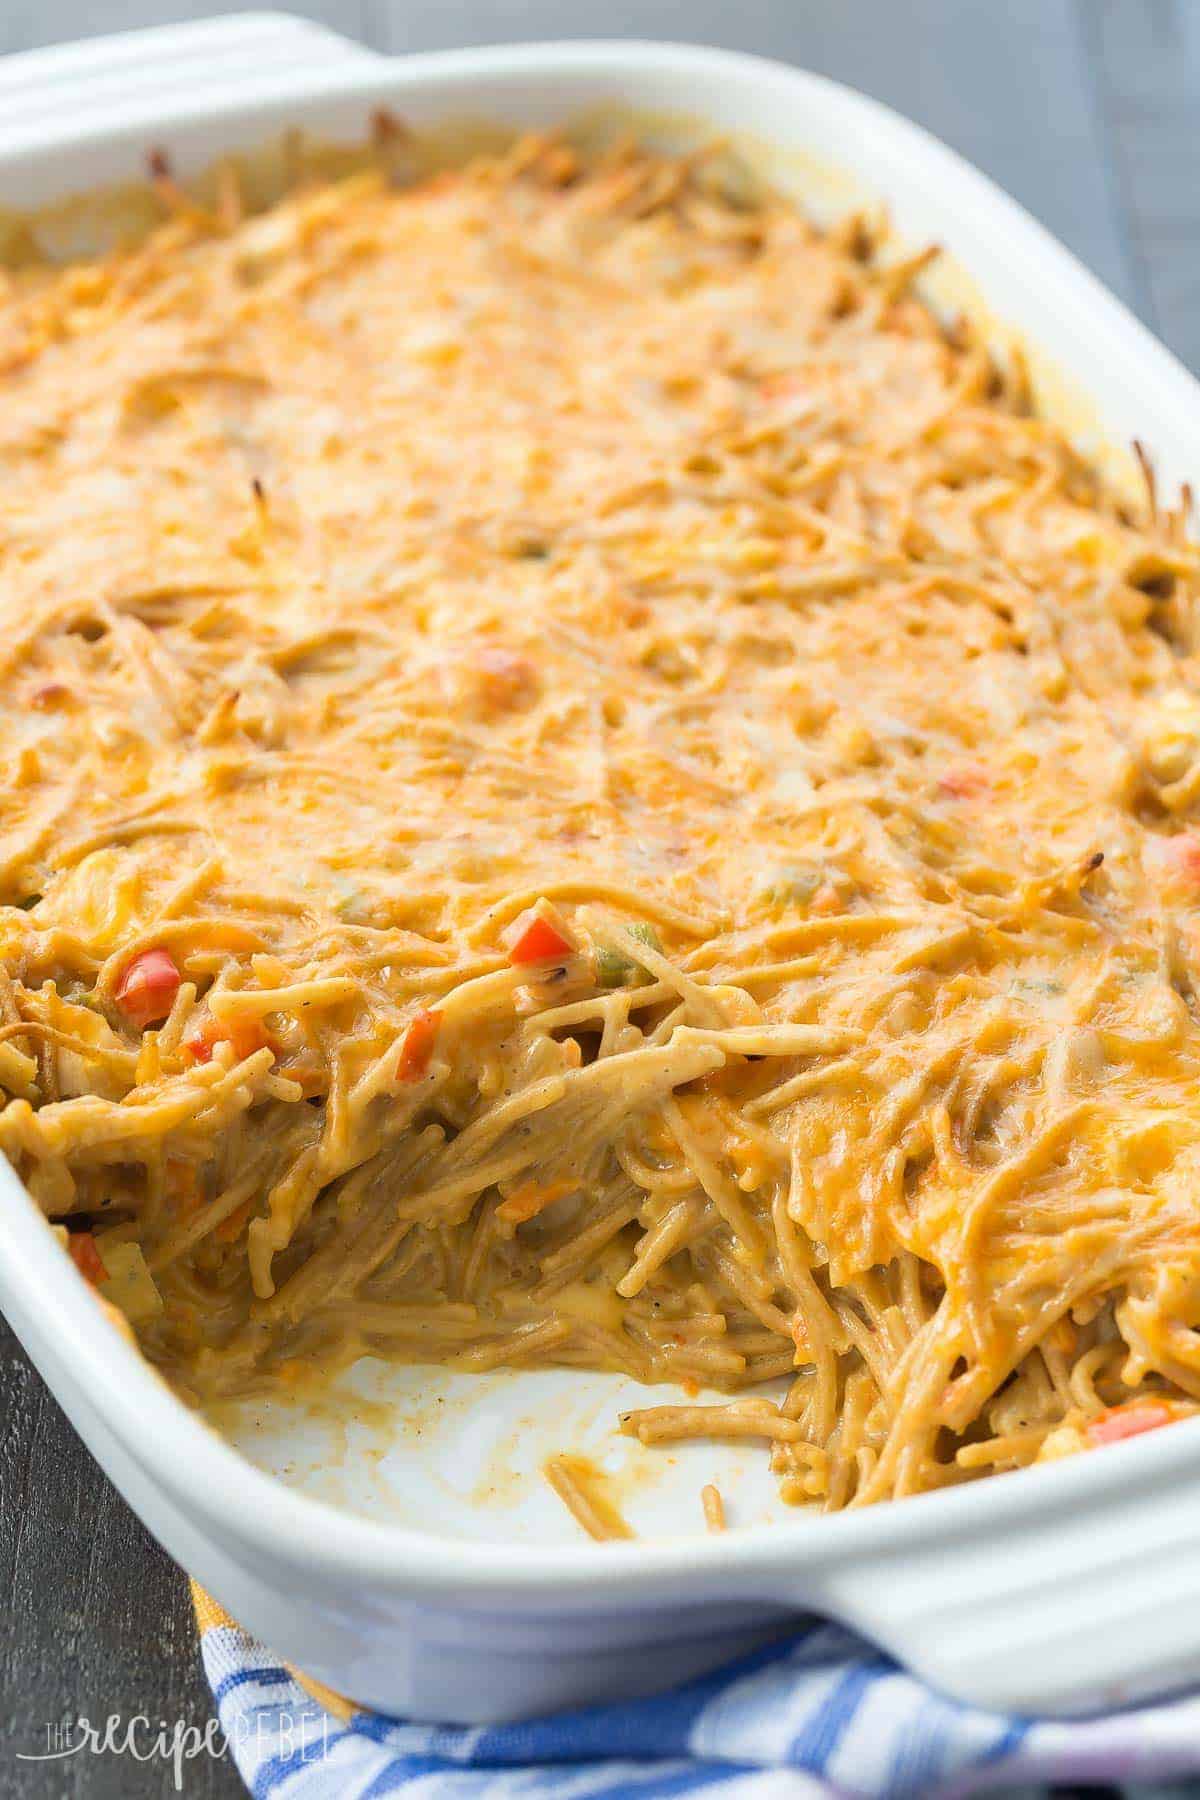 This Healthier Creamy Chicken Spaghetti Bake is a healthier version of a Pioneer Woman classic -- completely homemade with no cream soups! It's an easy make ahead and freezer friendly meal. Includes how to recipe video. | easy recipe | casserole recipe | make ahead | meal prep | kid friendly